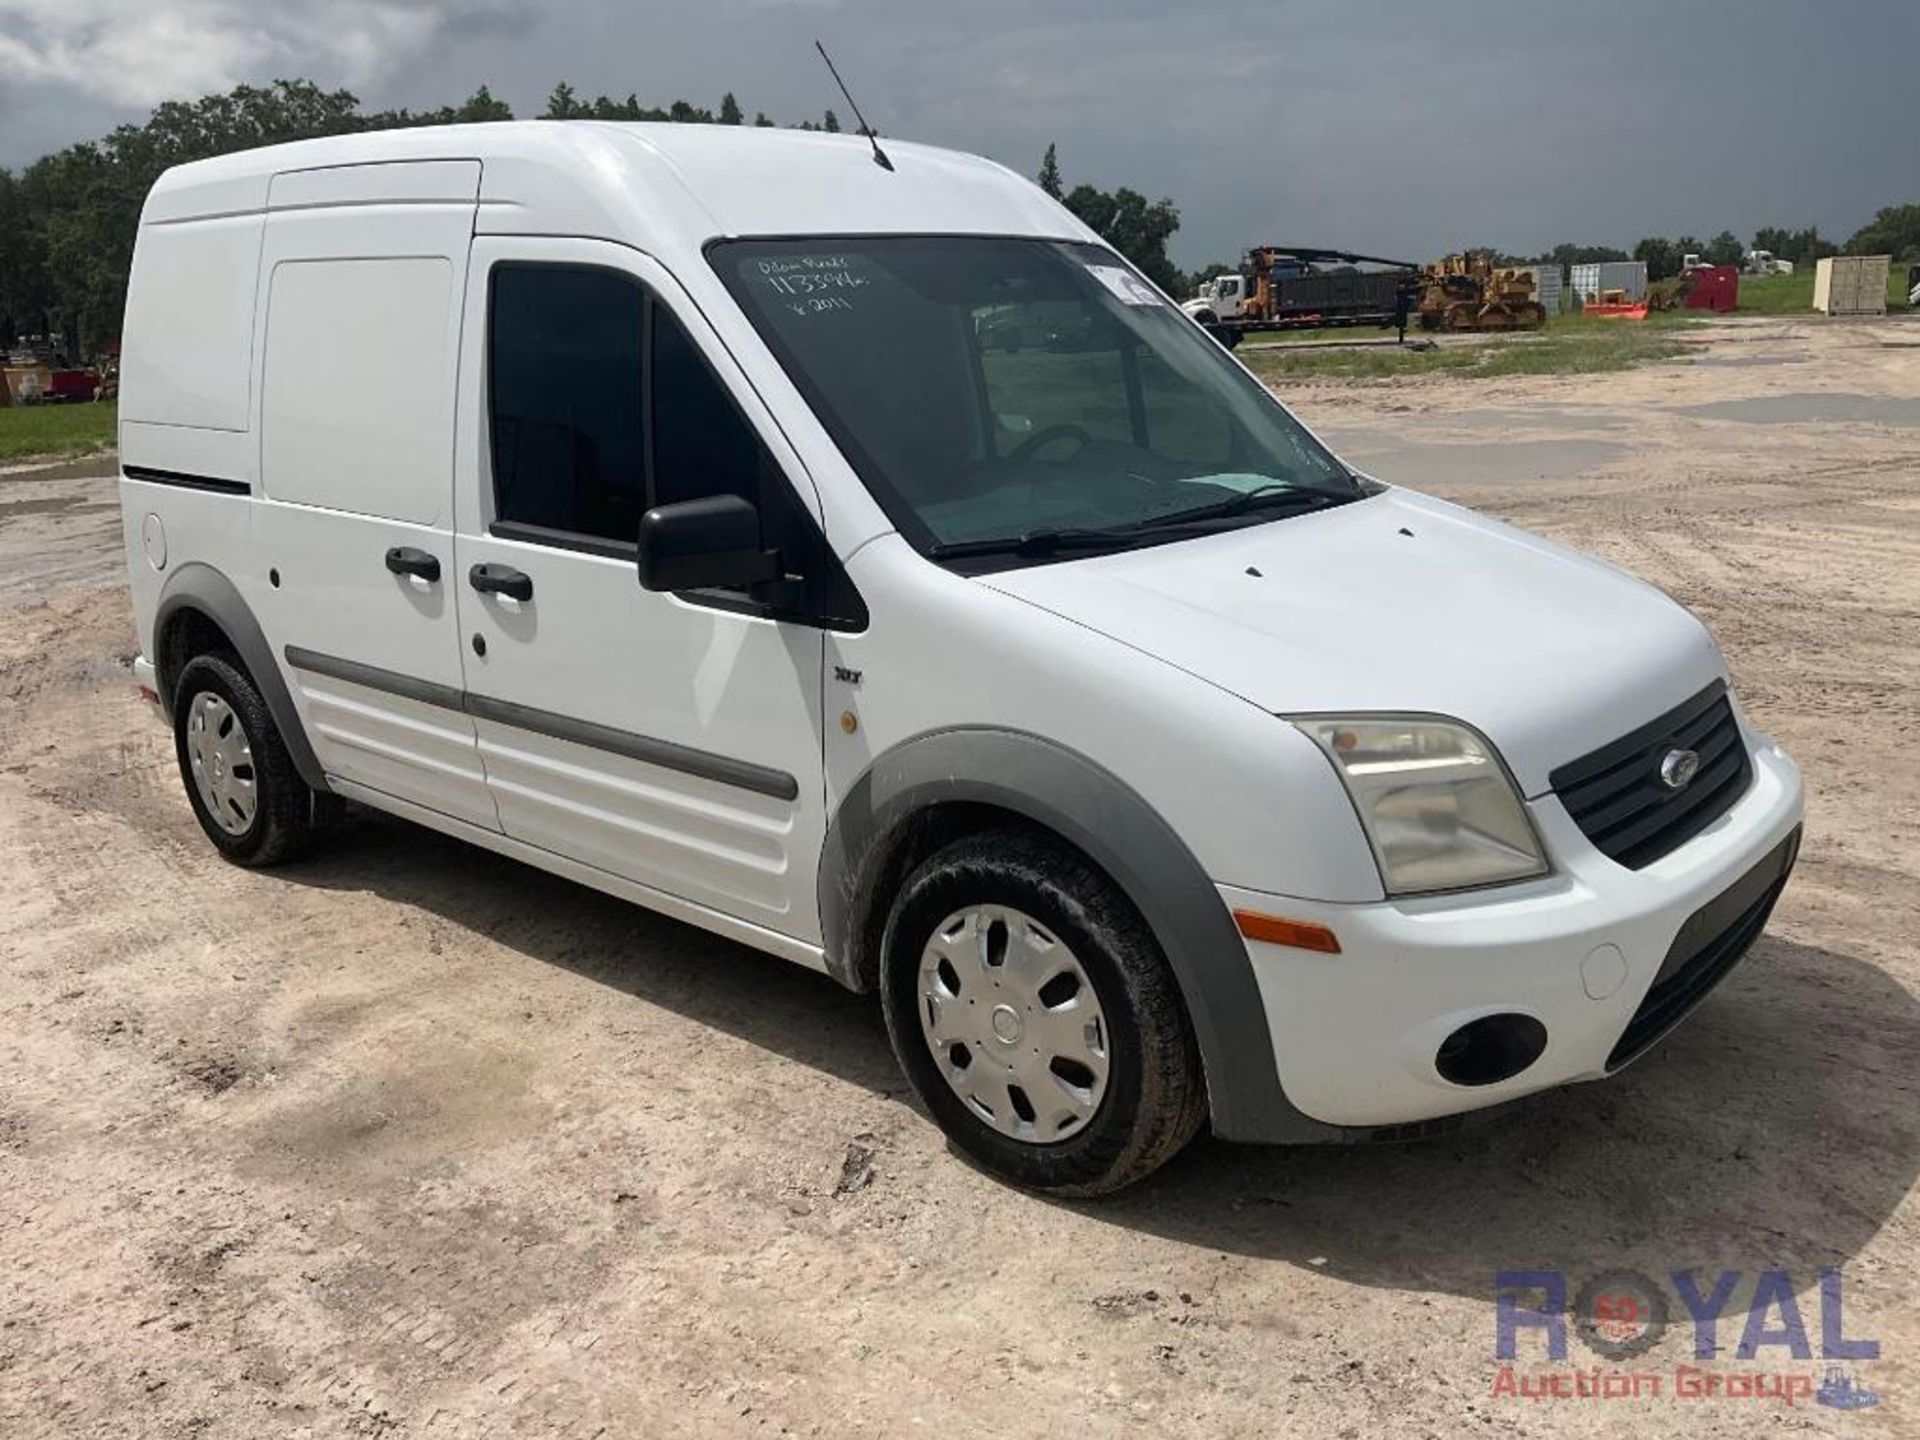 2012 Ford Transit Connect Van - Image 2 of 26